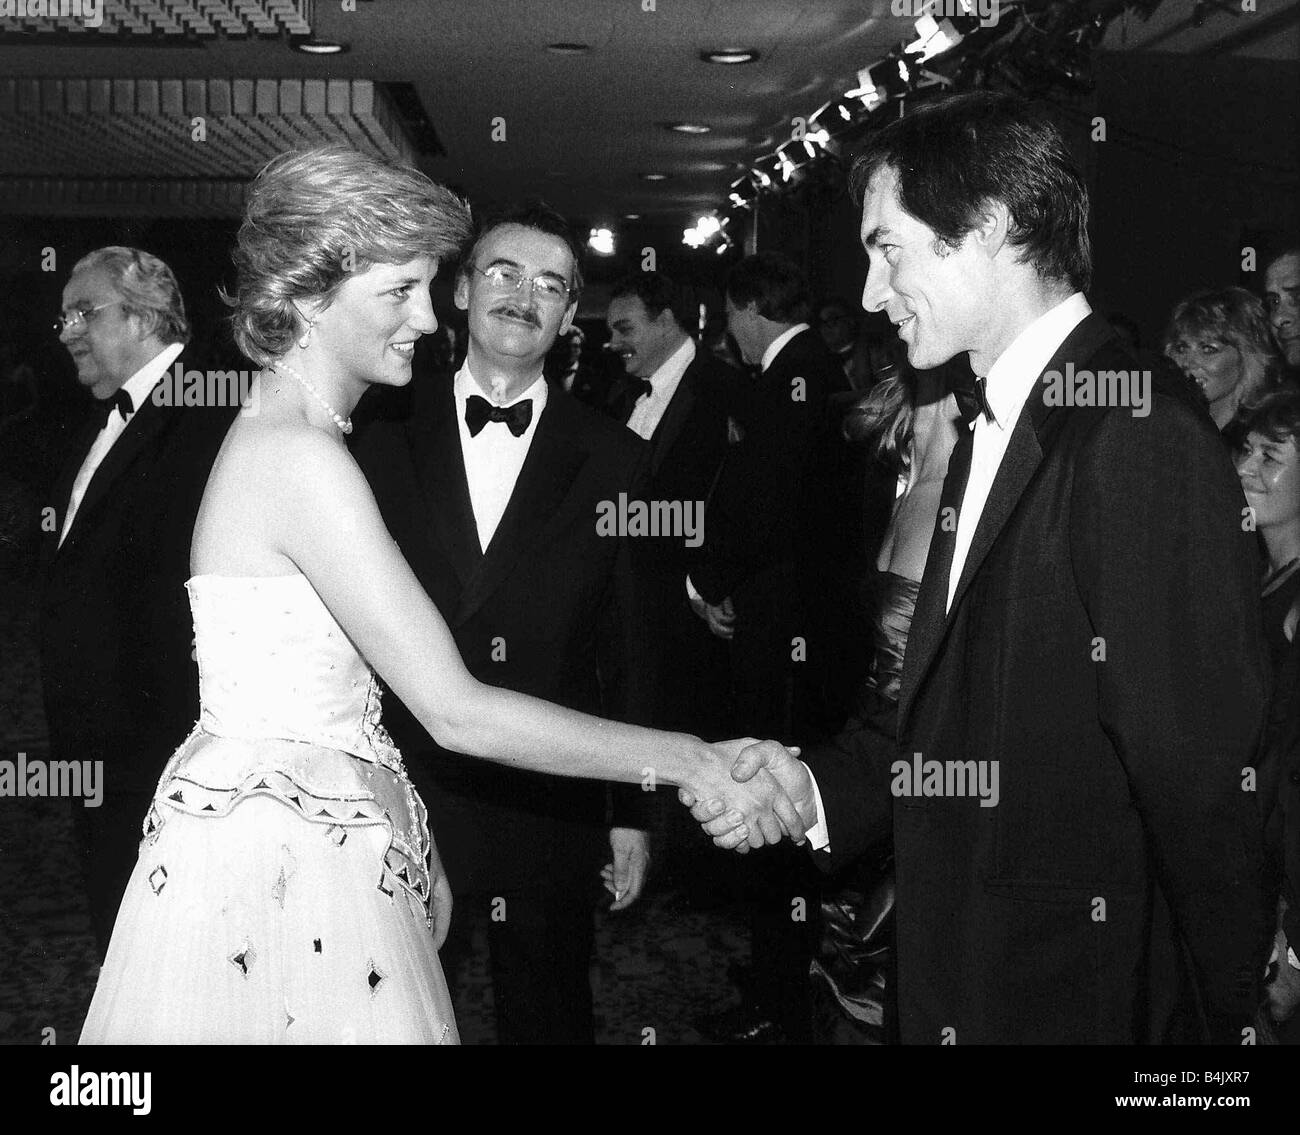 Timothy Dalton actor meeting Princess Diana attending the charity premiere of The Living Daylights at the Odeon Leicester Square June 1987 DBase Stock Photo